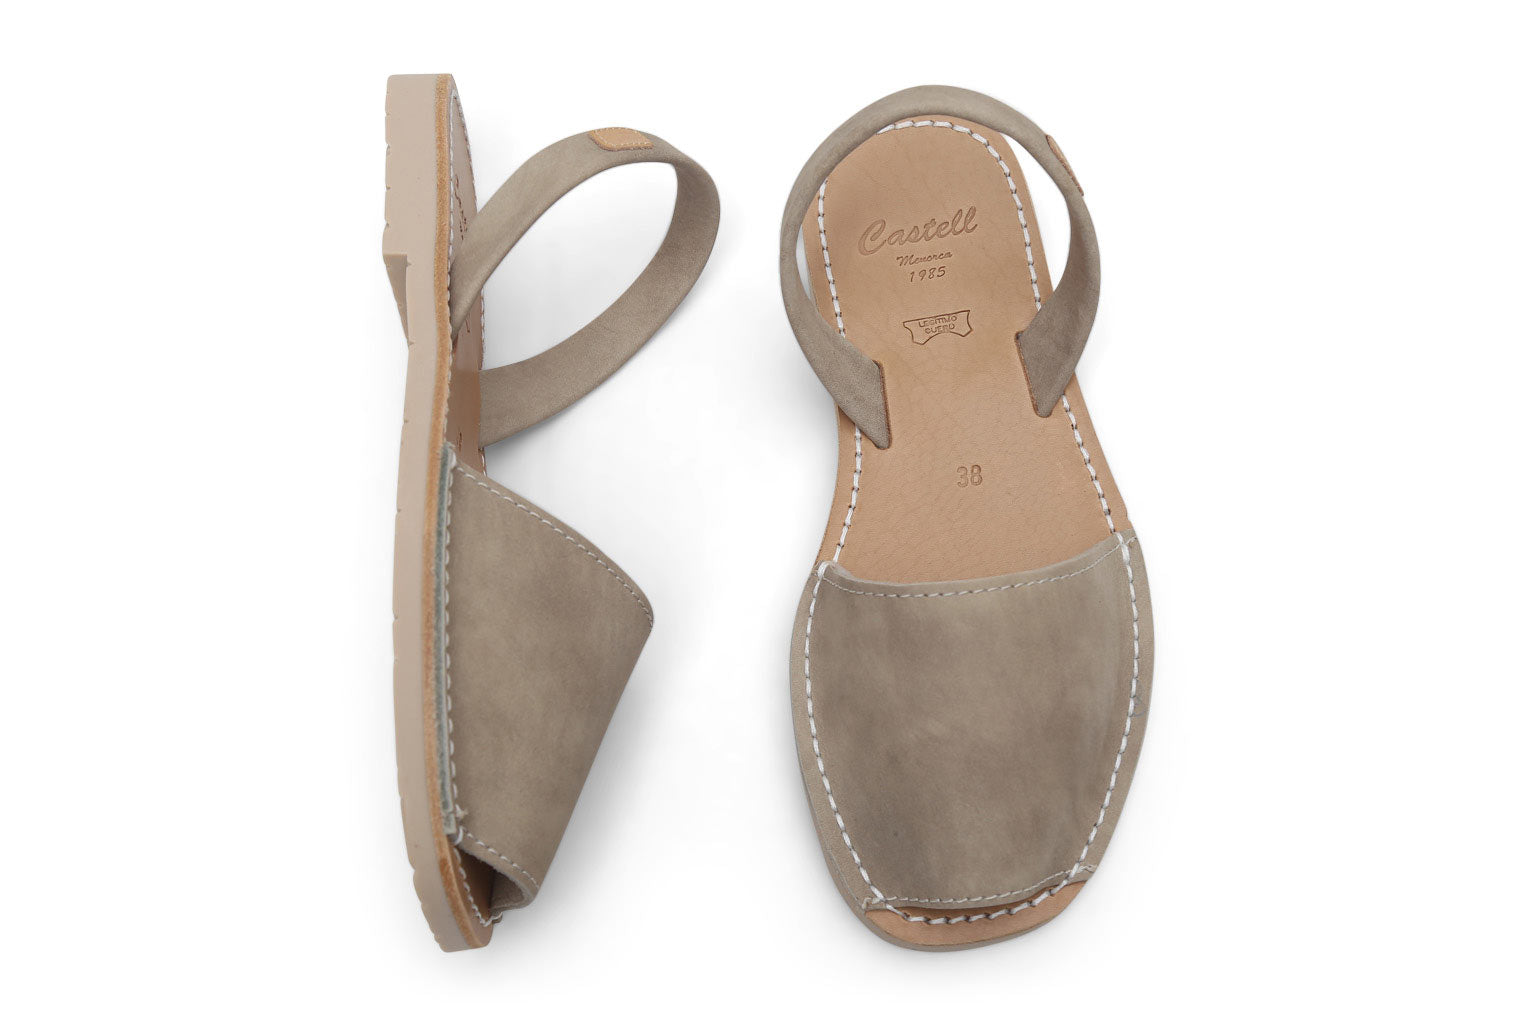 Castell Avarcas Vecco Leather Menorcan Sandals - THE AVARCA STORE